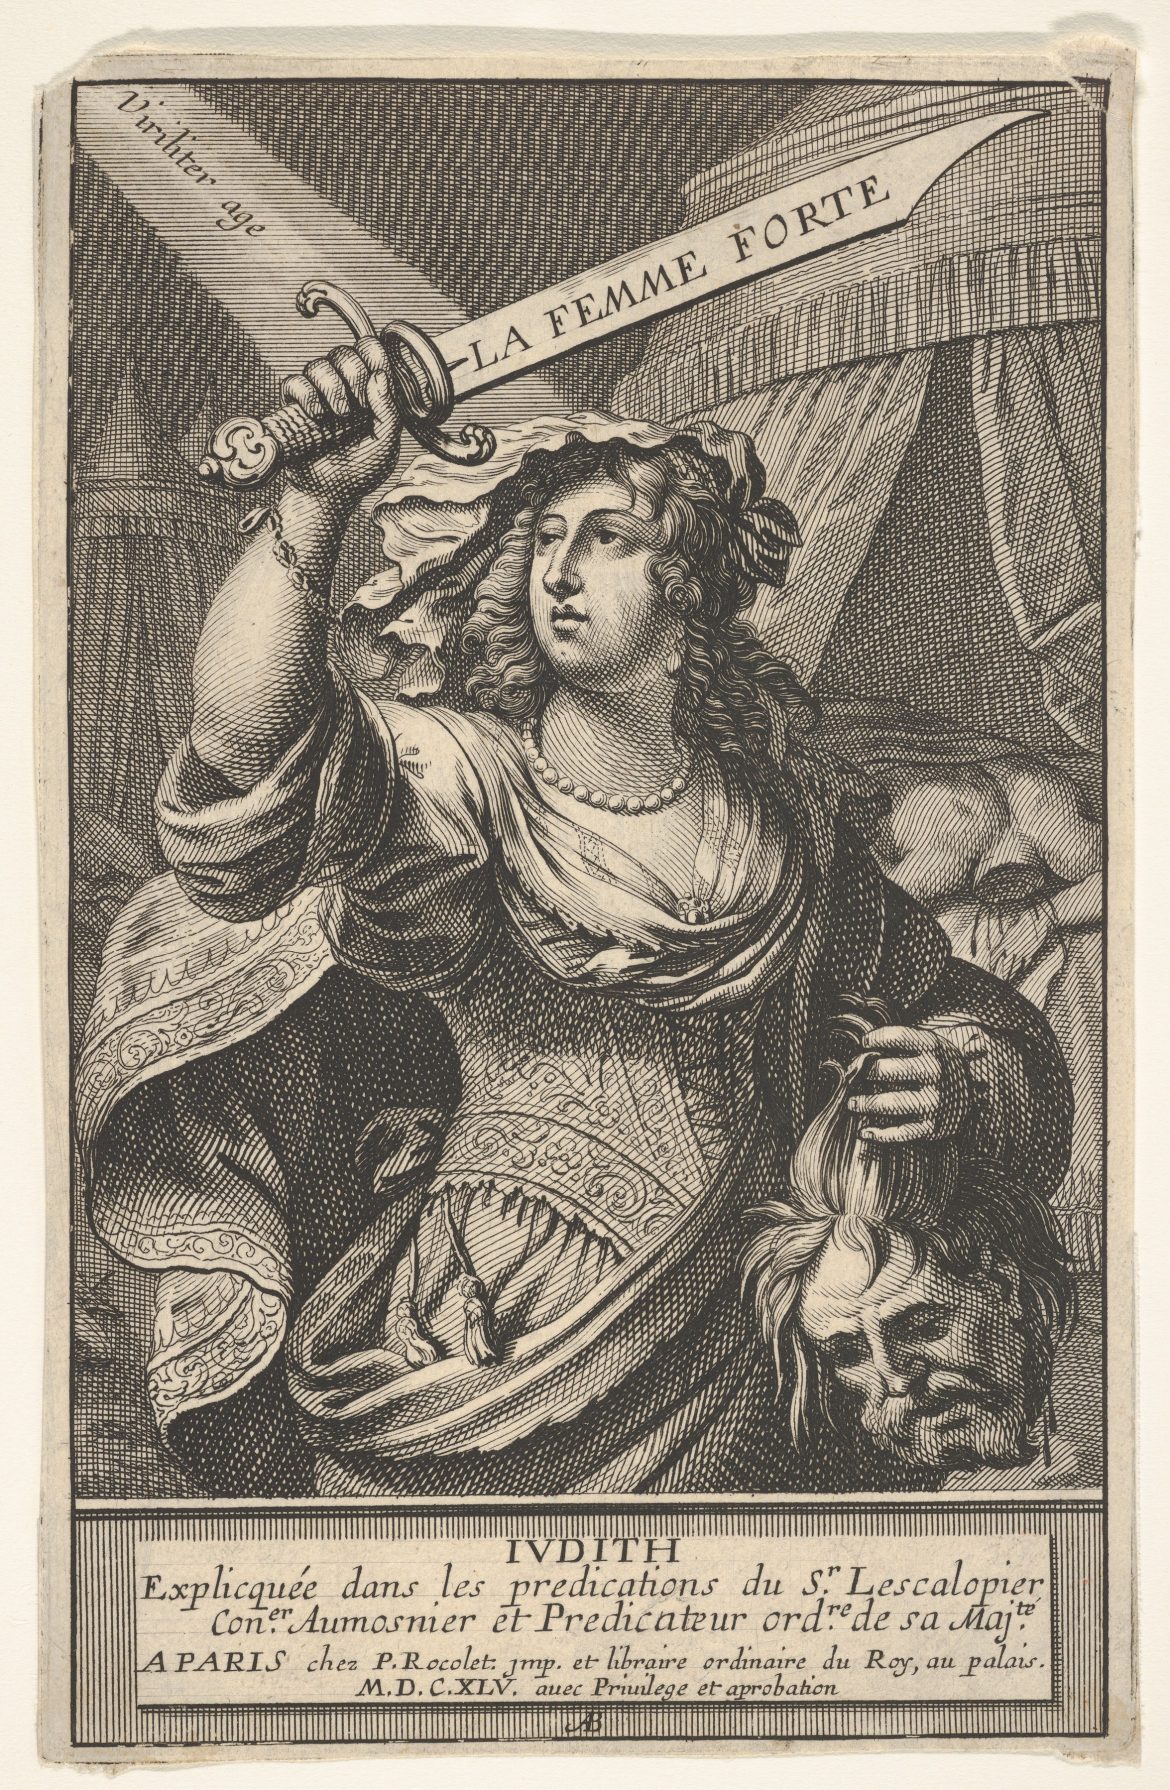 Judith and Holofernes by Abraham Bosse